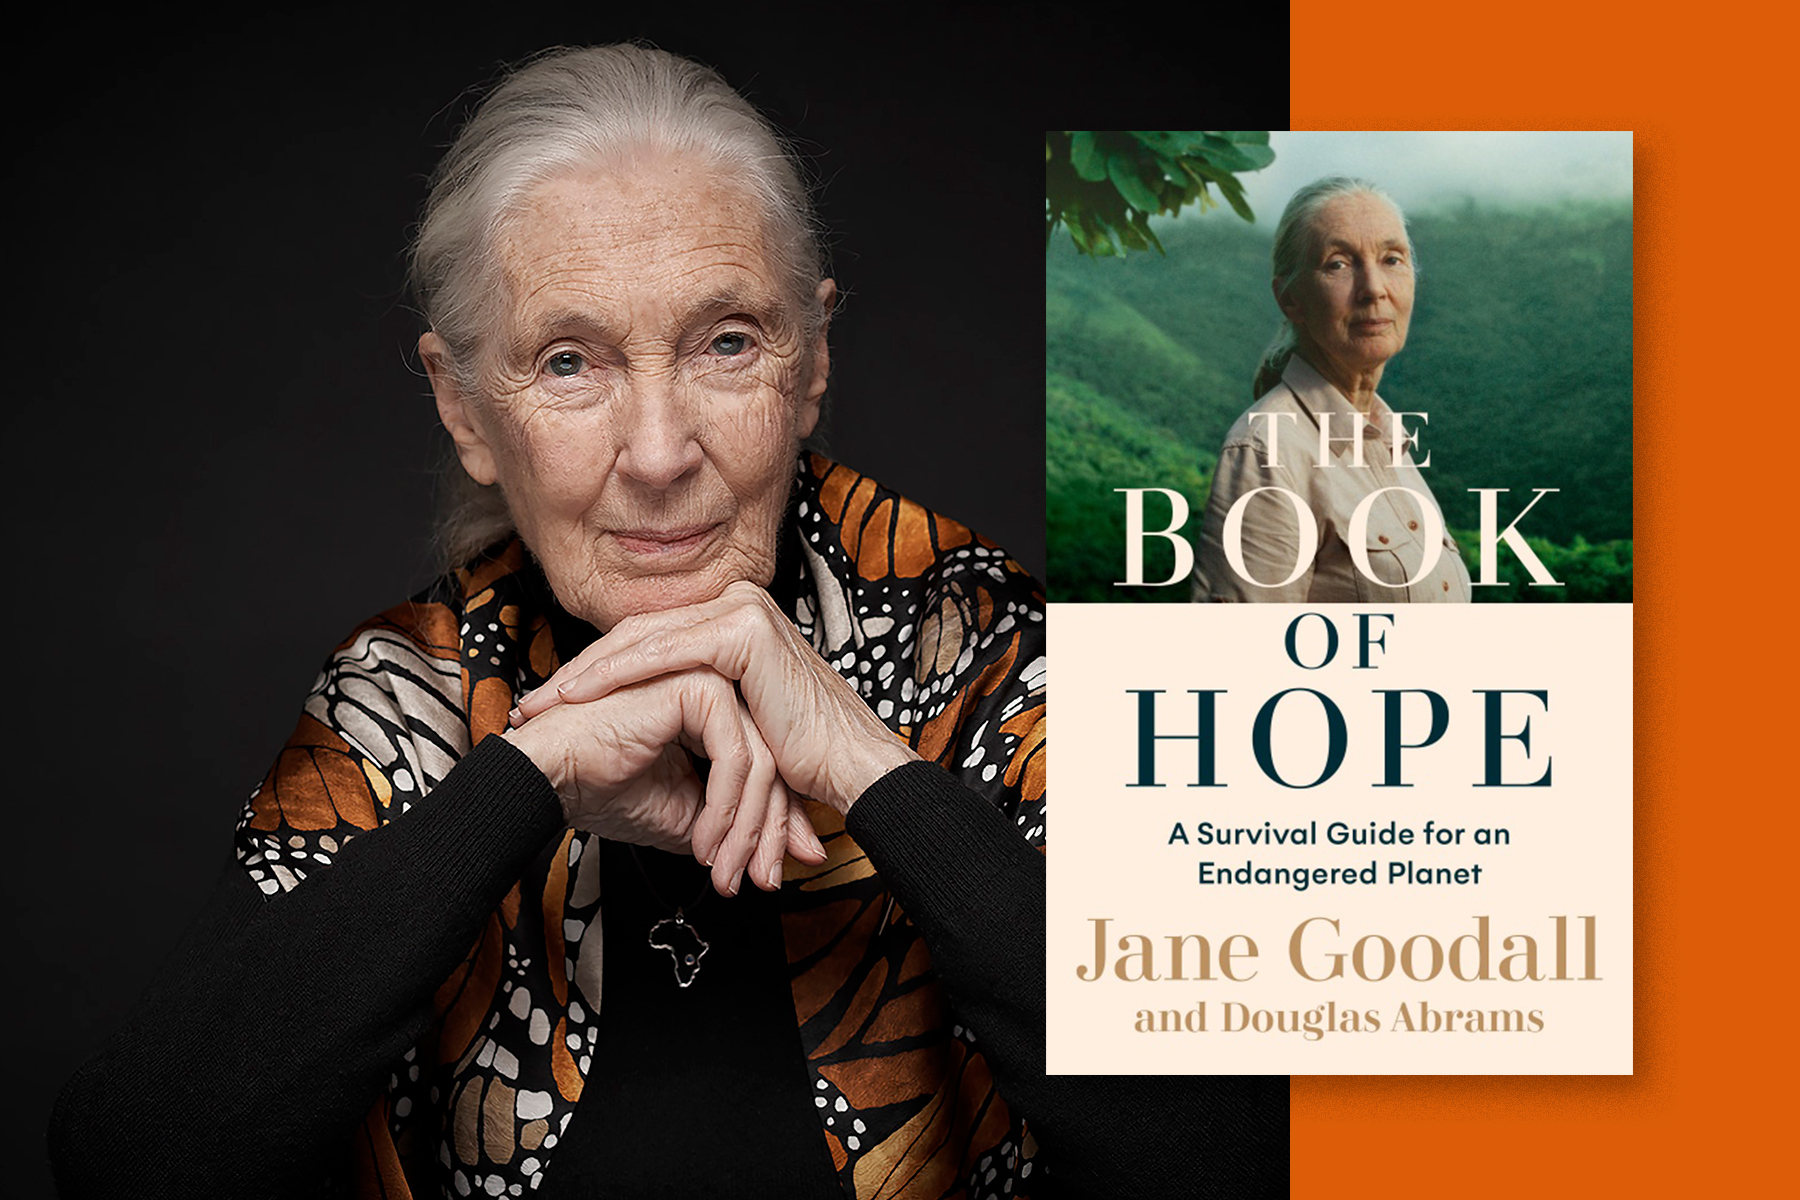 A photo of anthropologist Jane Goodall with the cover of her new book, The Book of Hope, overlaid on the right.